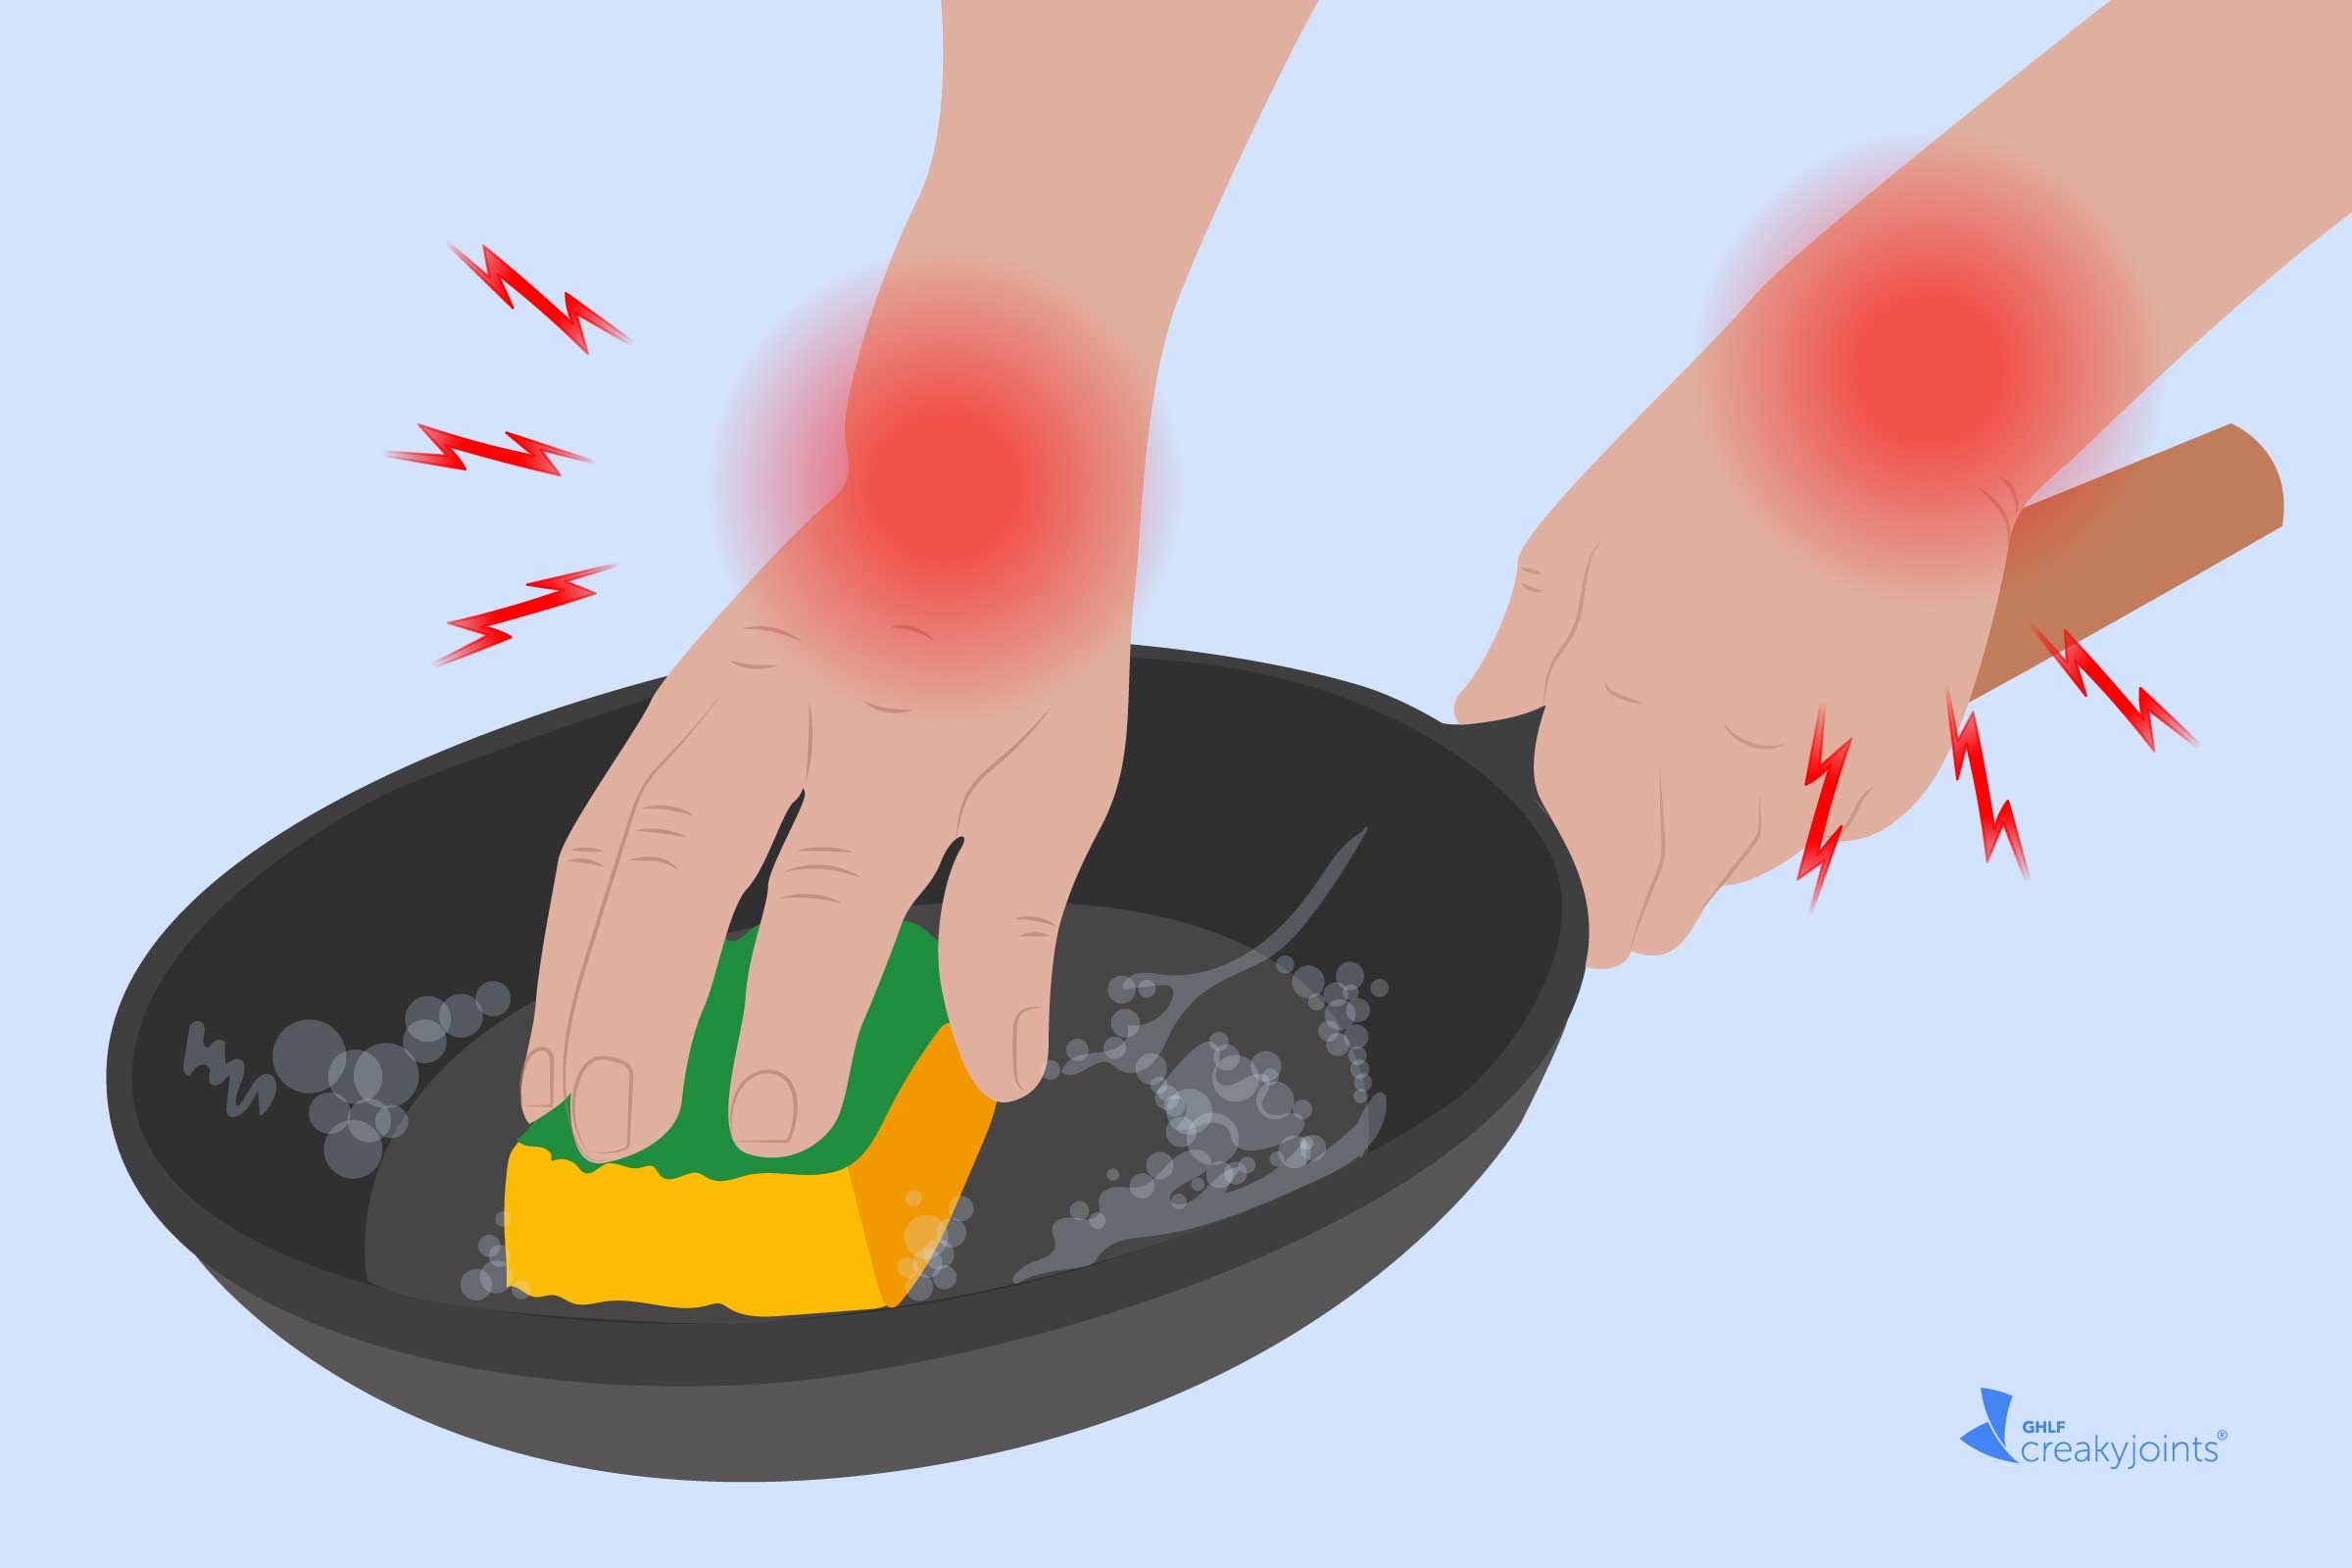 Cleaning Pots and Pans with Arthritis: How to Make It Less Painful